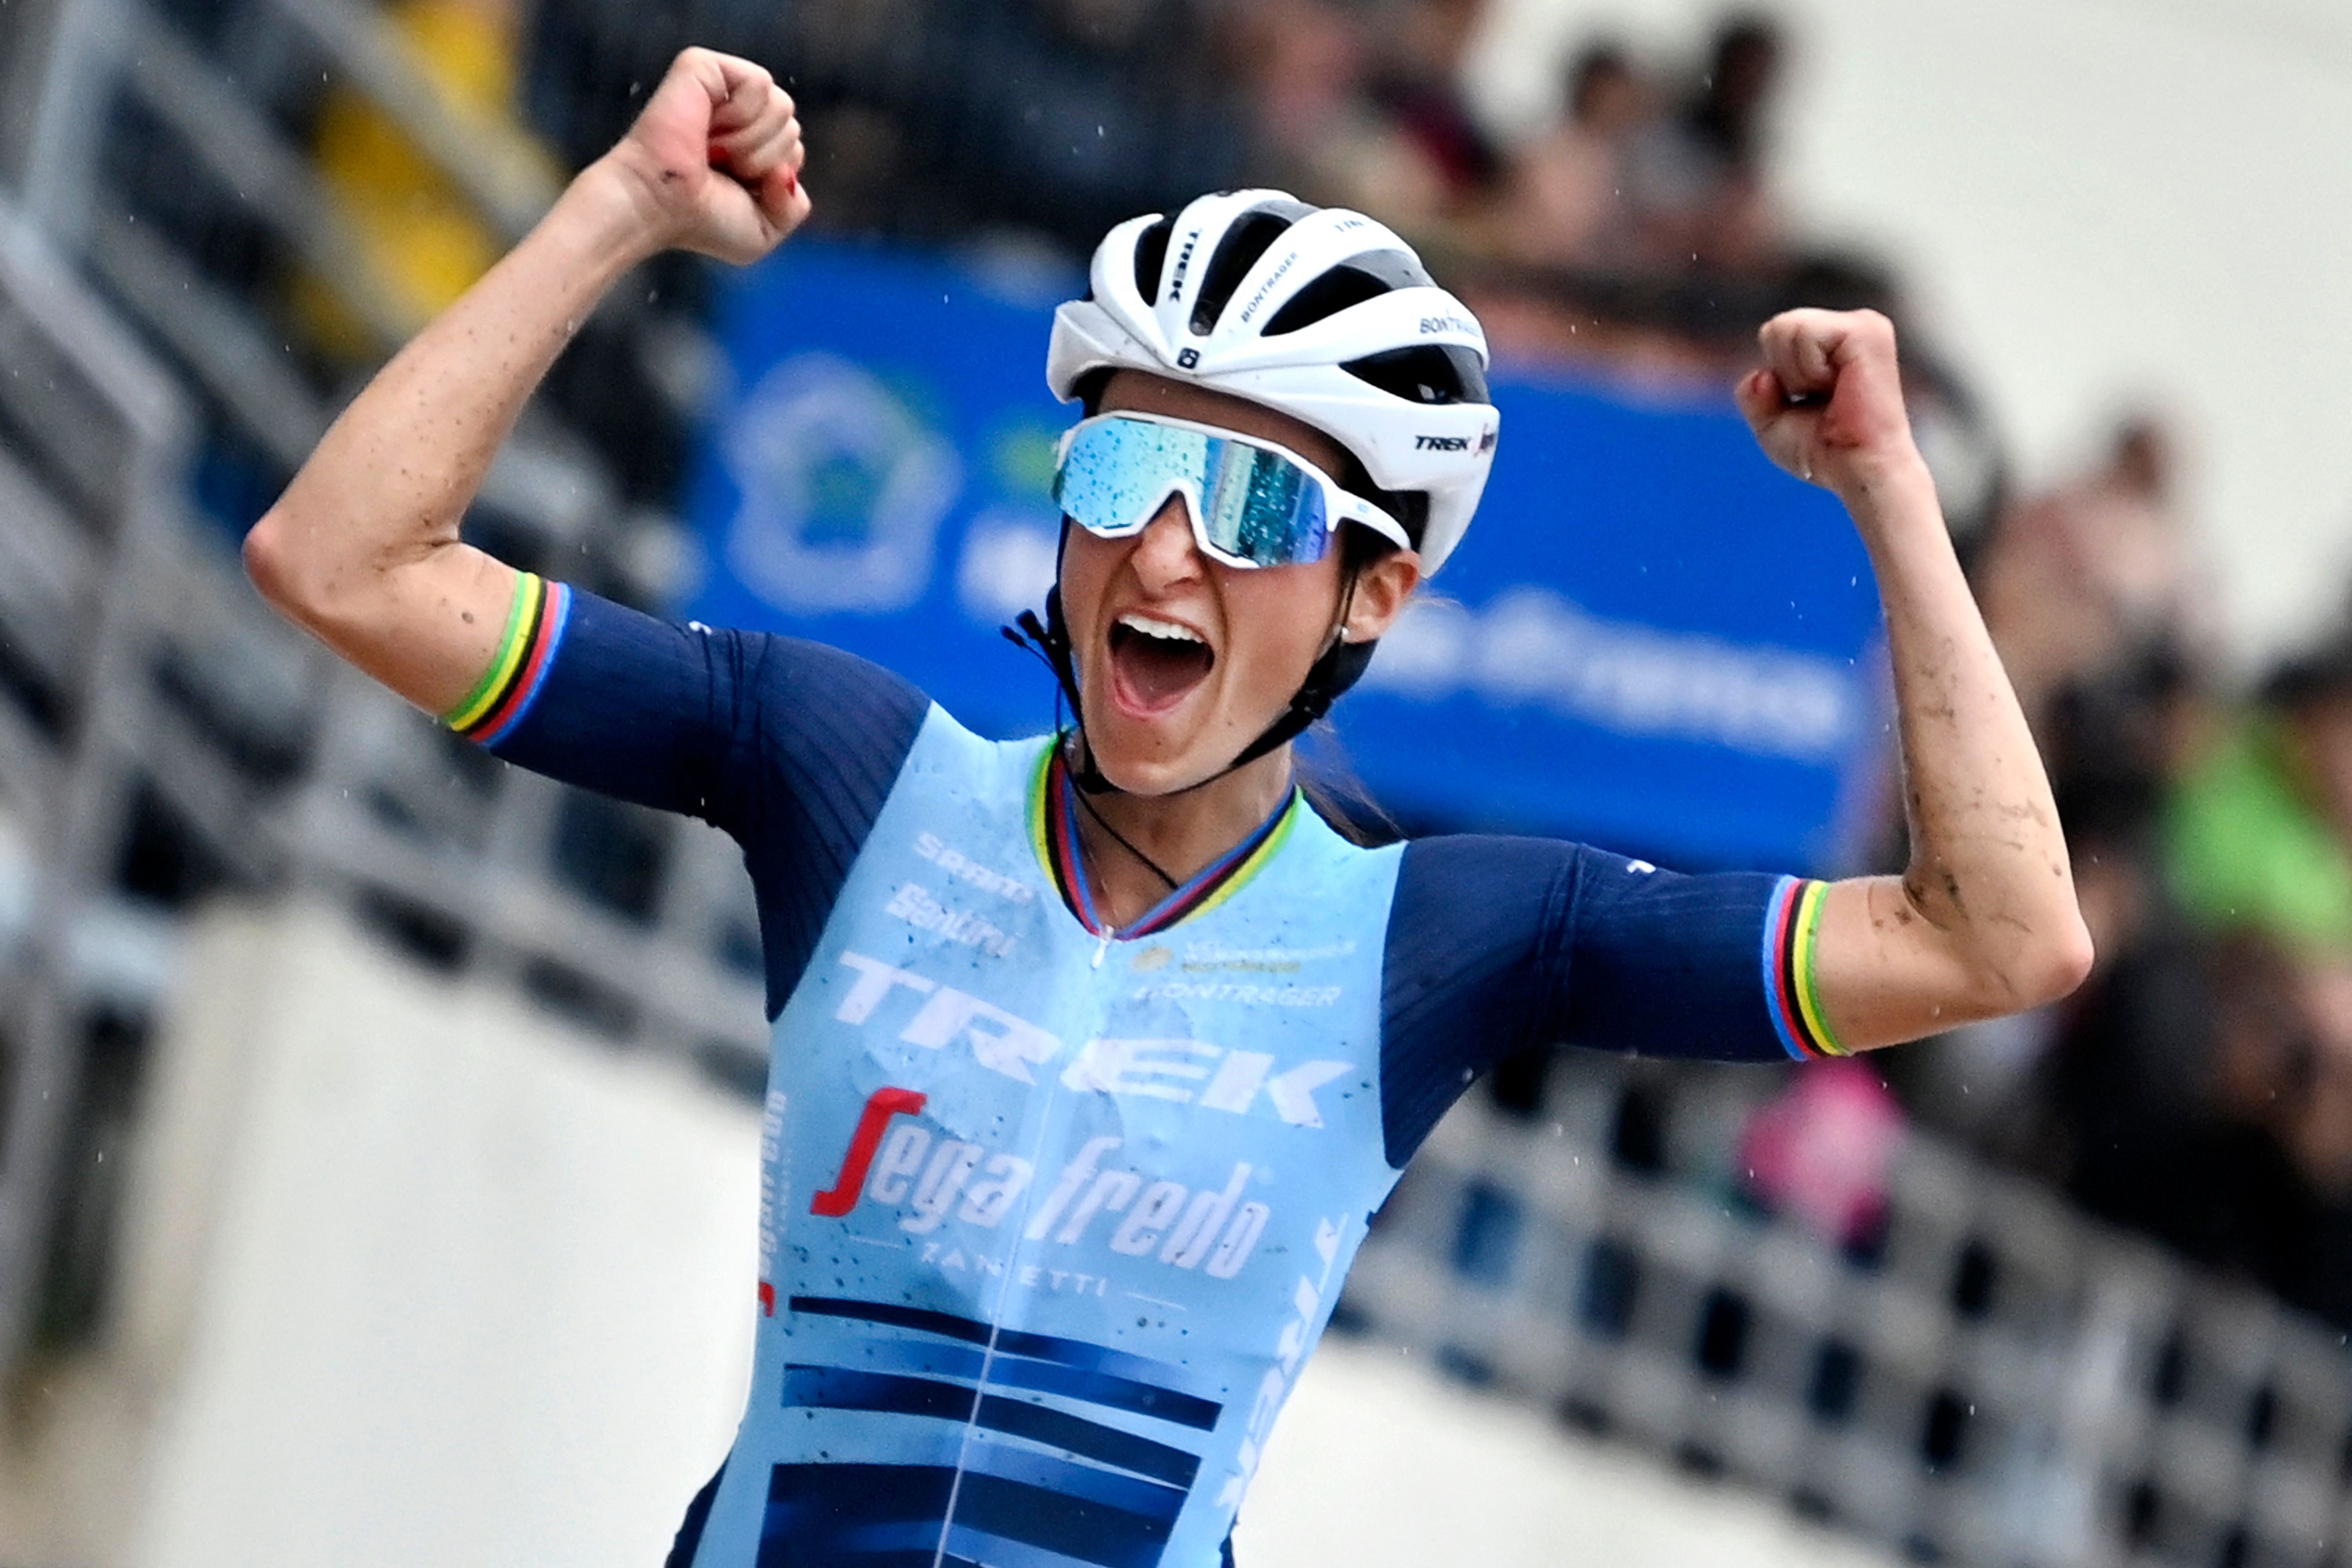 Lizzie Deignan celebrates as she crosses the finish line to win the first edition of the women elite race of the 'Paris-Roubaix' cycling event